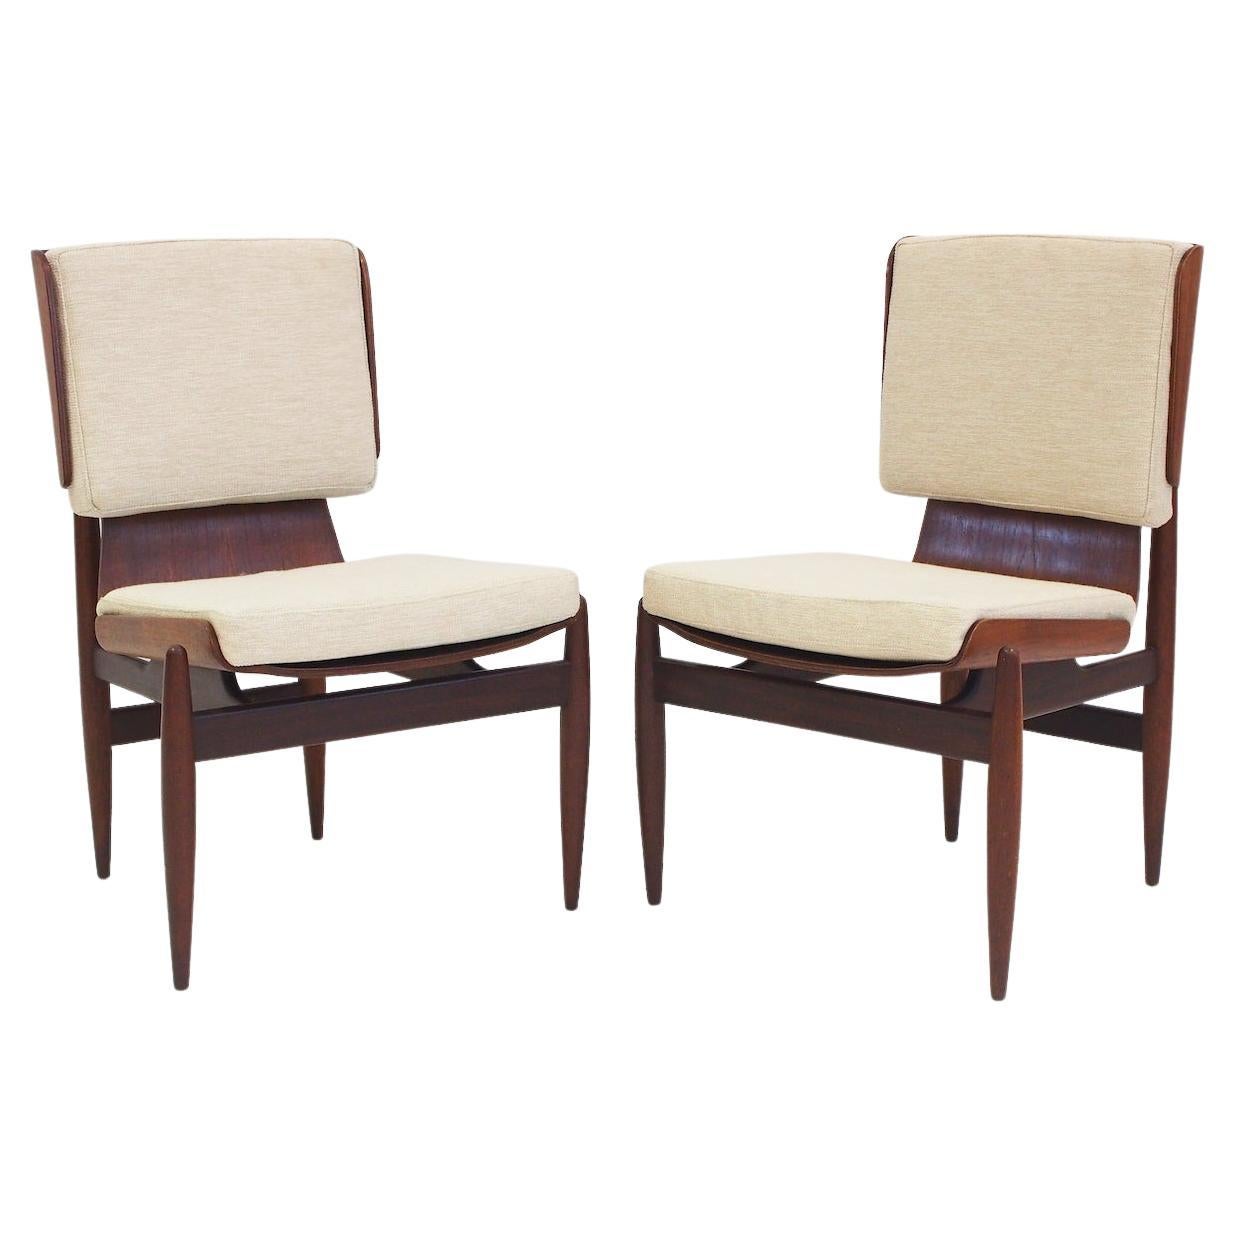 Pair of Italian Modernist Wooden Side Chairs by Barovero